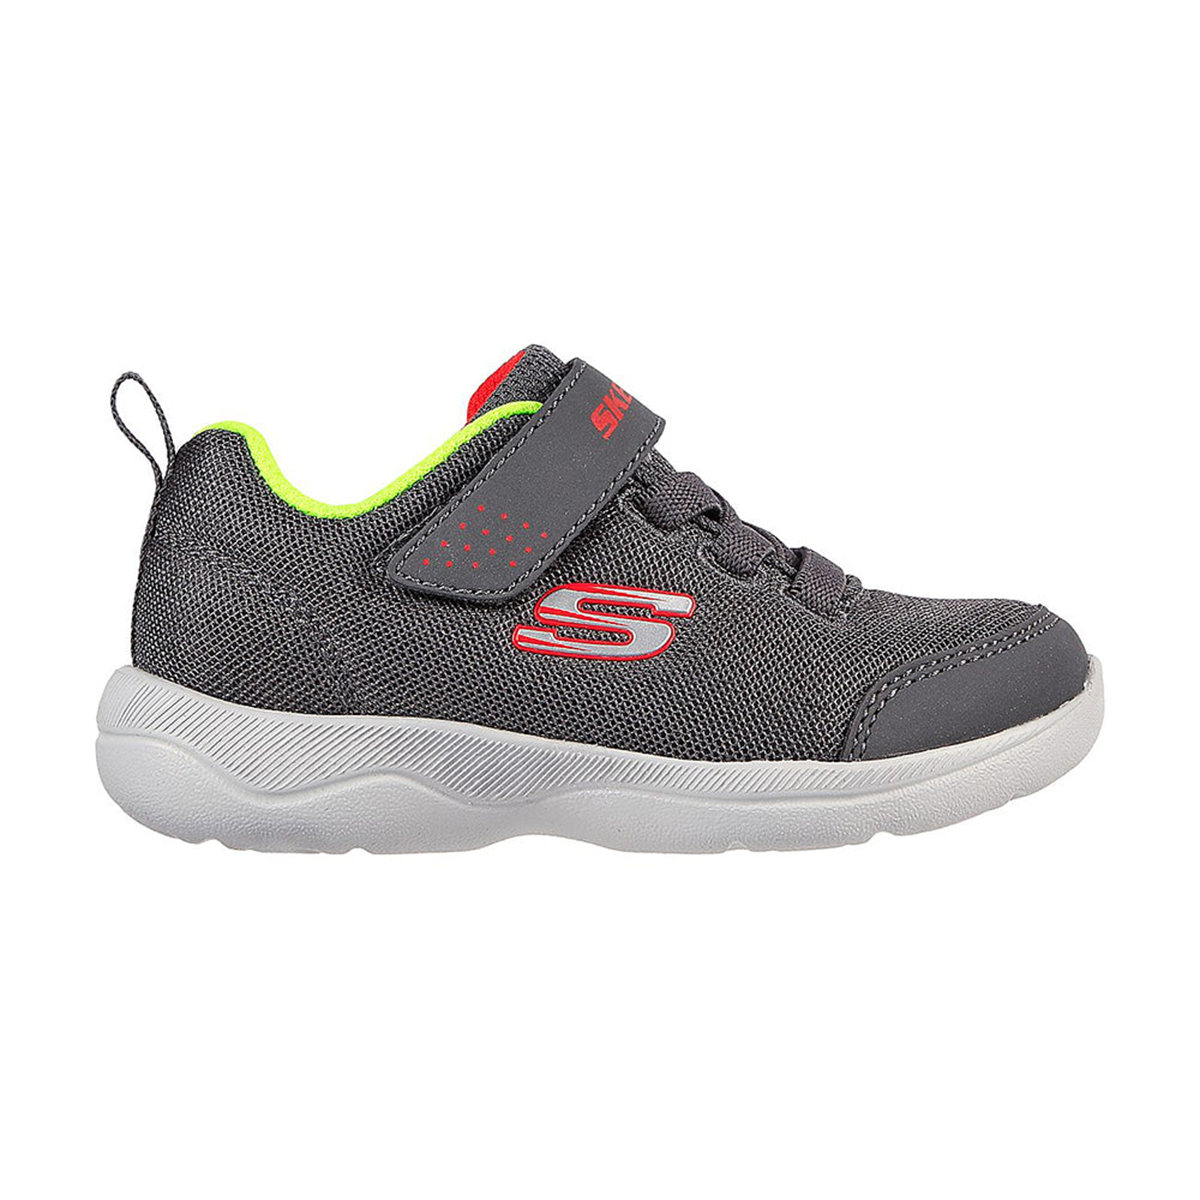 Lifestyle SKECH-STEPZ 2.0 SHOES